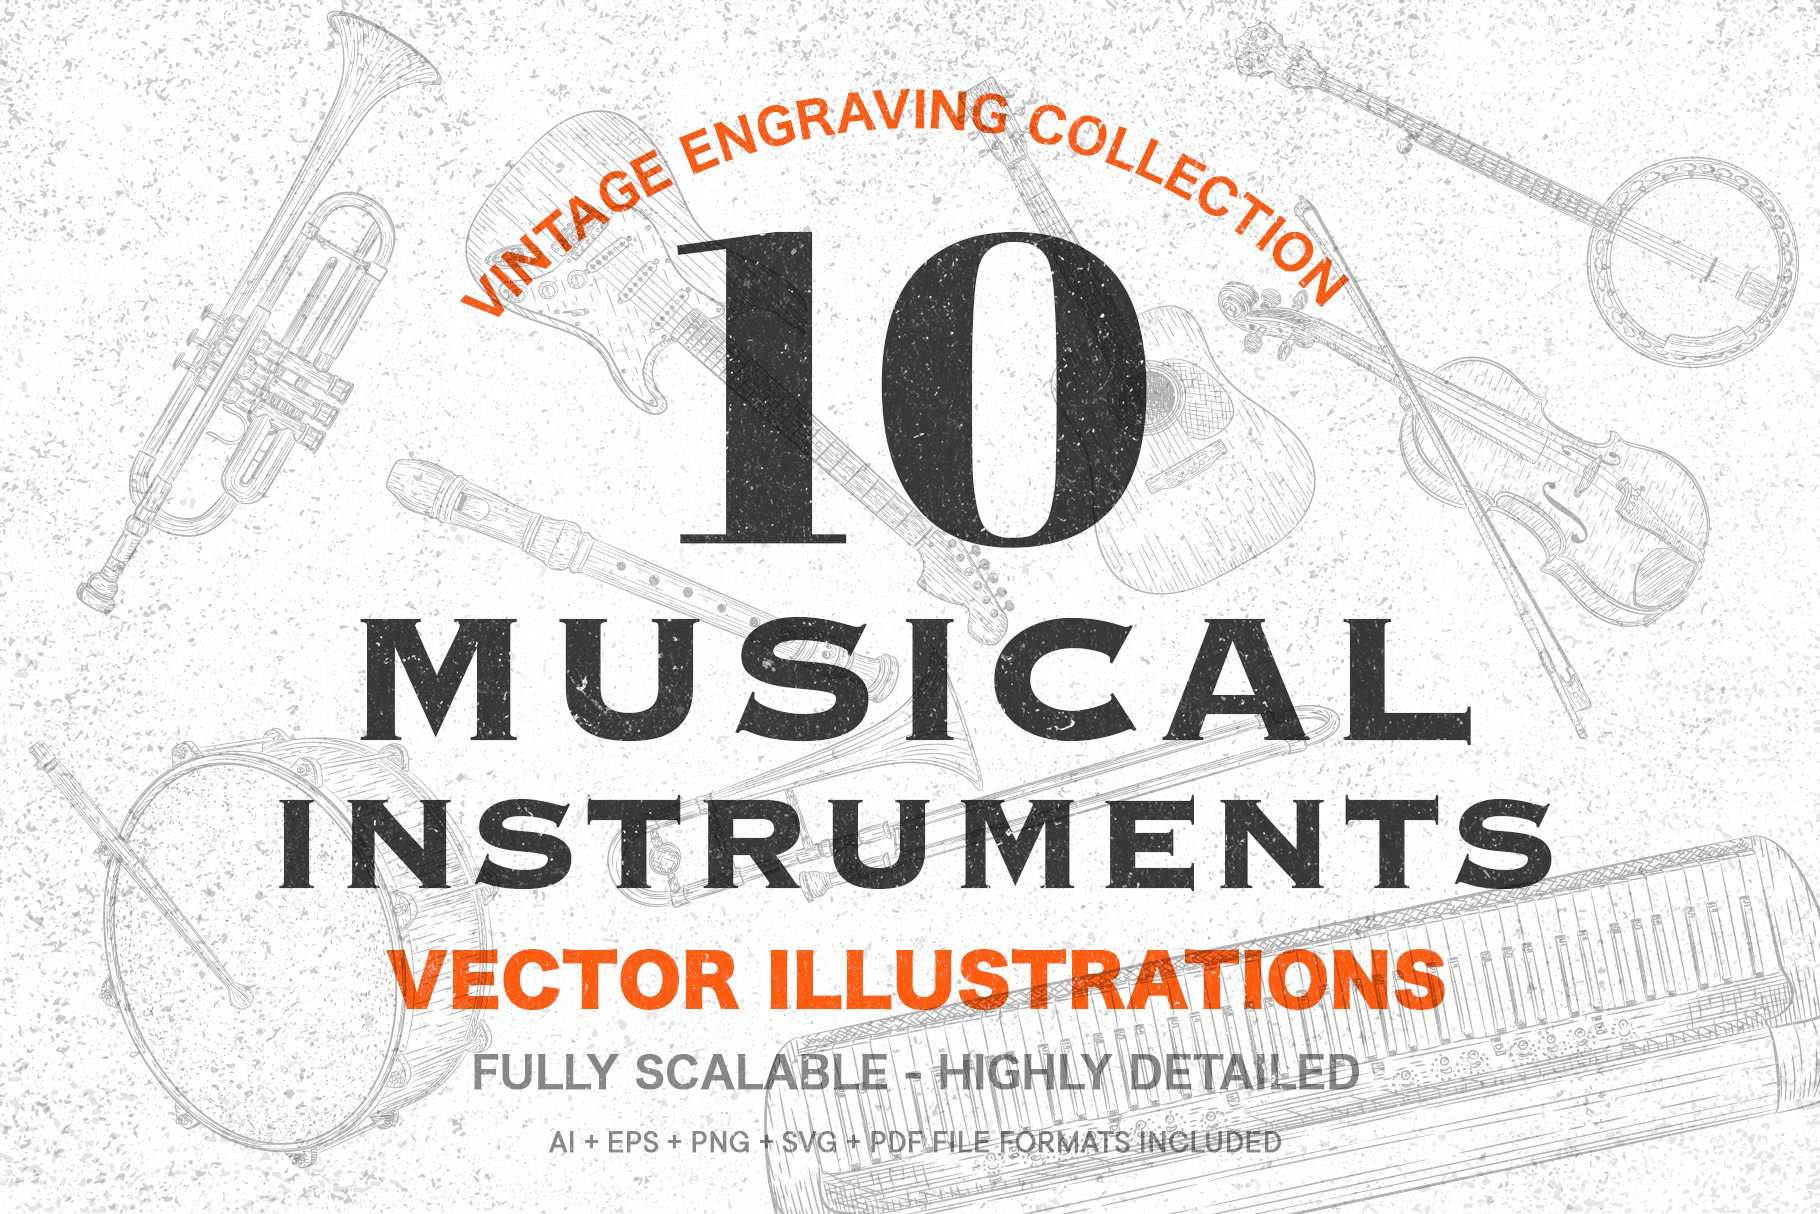 10 Vintage Musical Instruments cover image.